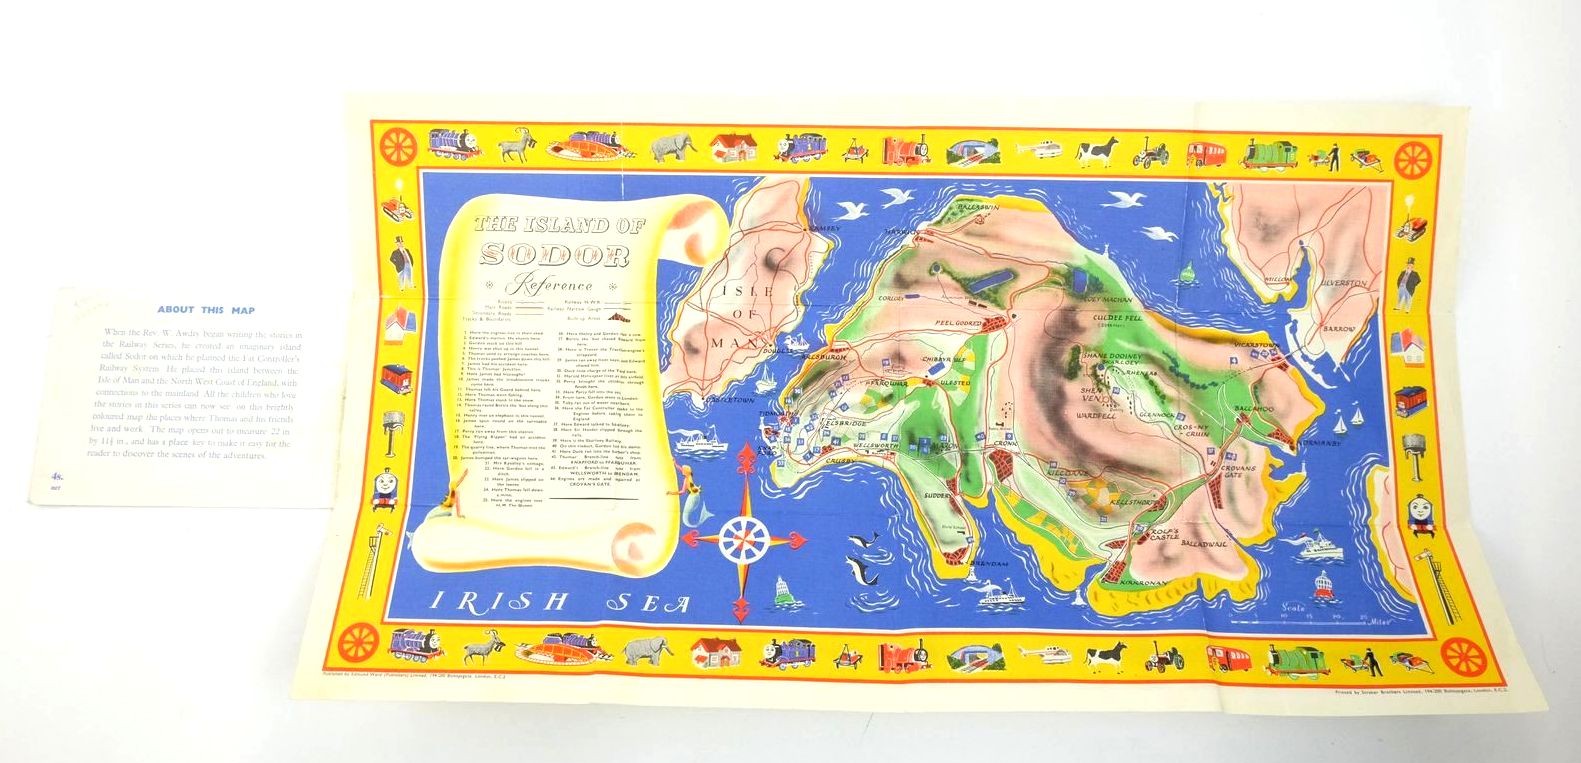 Stella & Rose's Books : RAILWAY MAP OF THE ISLAND OF SODOR Written By ...